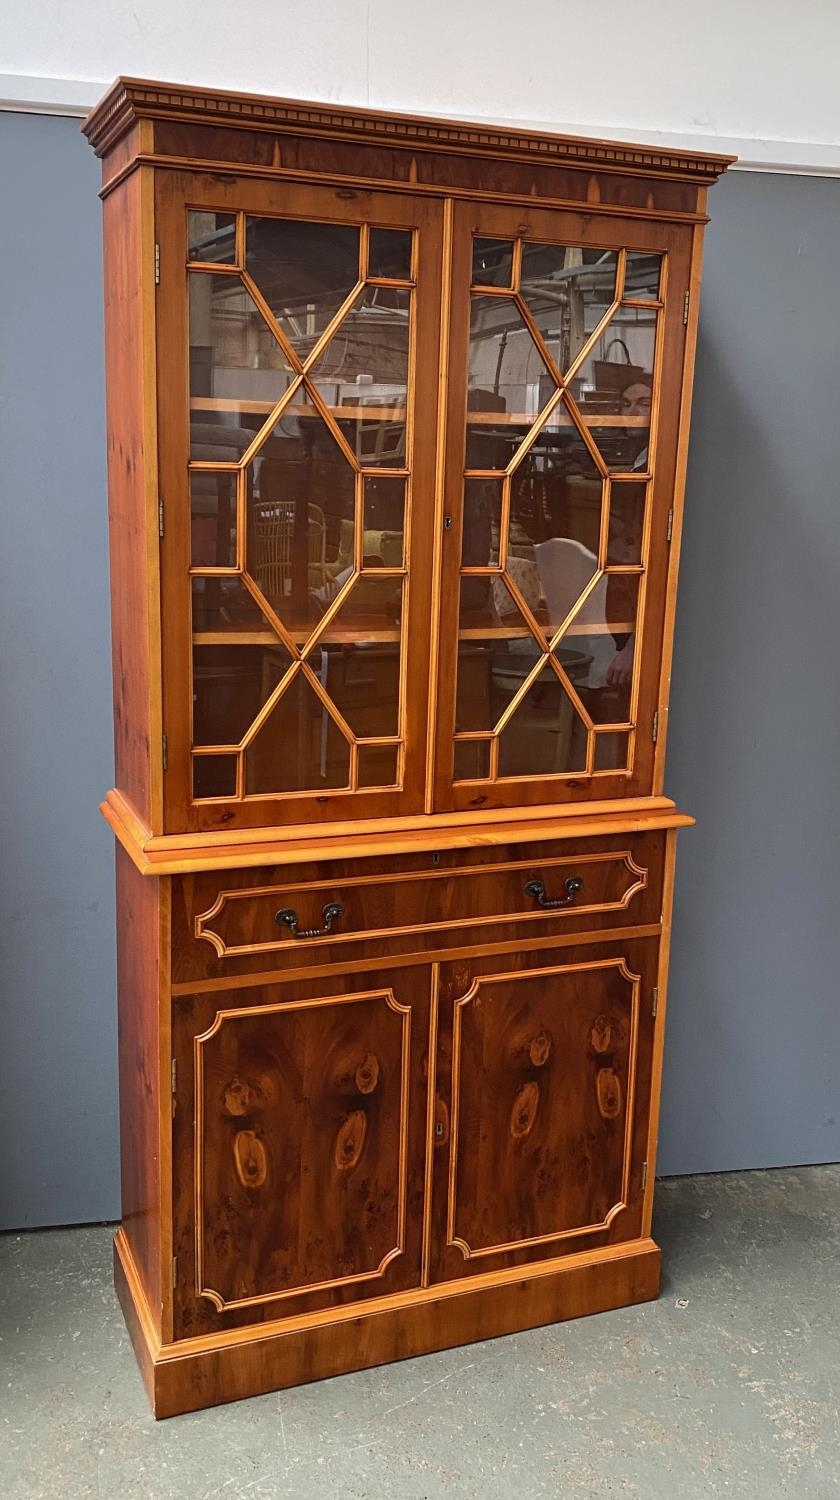 A 20th century yew veneer glazed bookcase, with single drawer and cupboards below, 95x39x200cmH